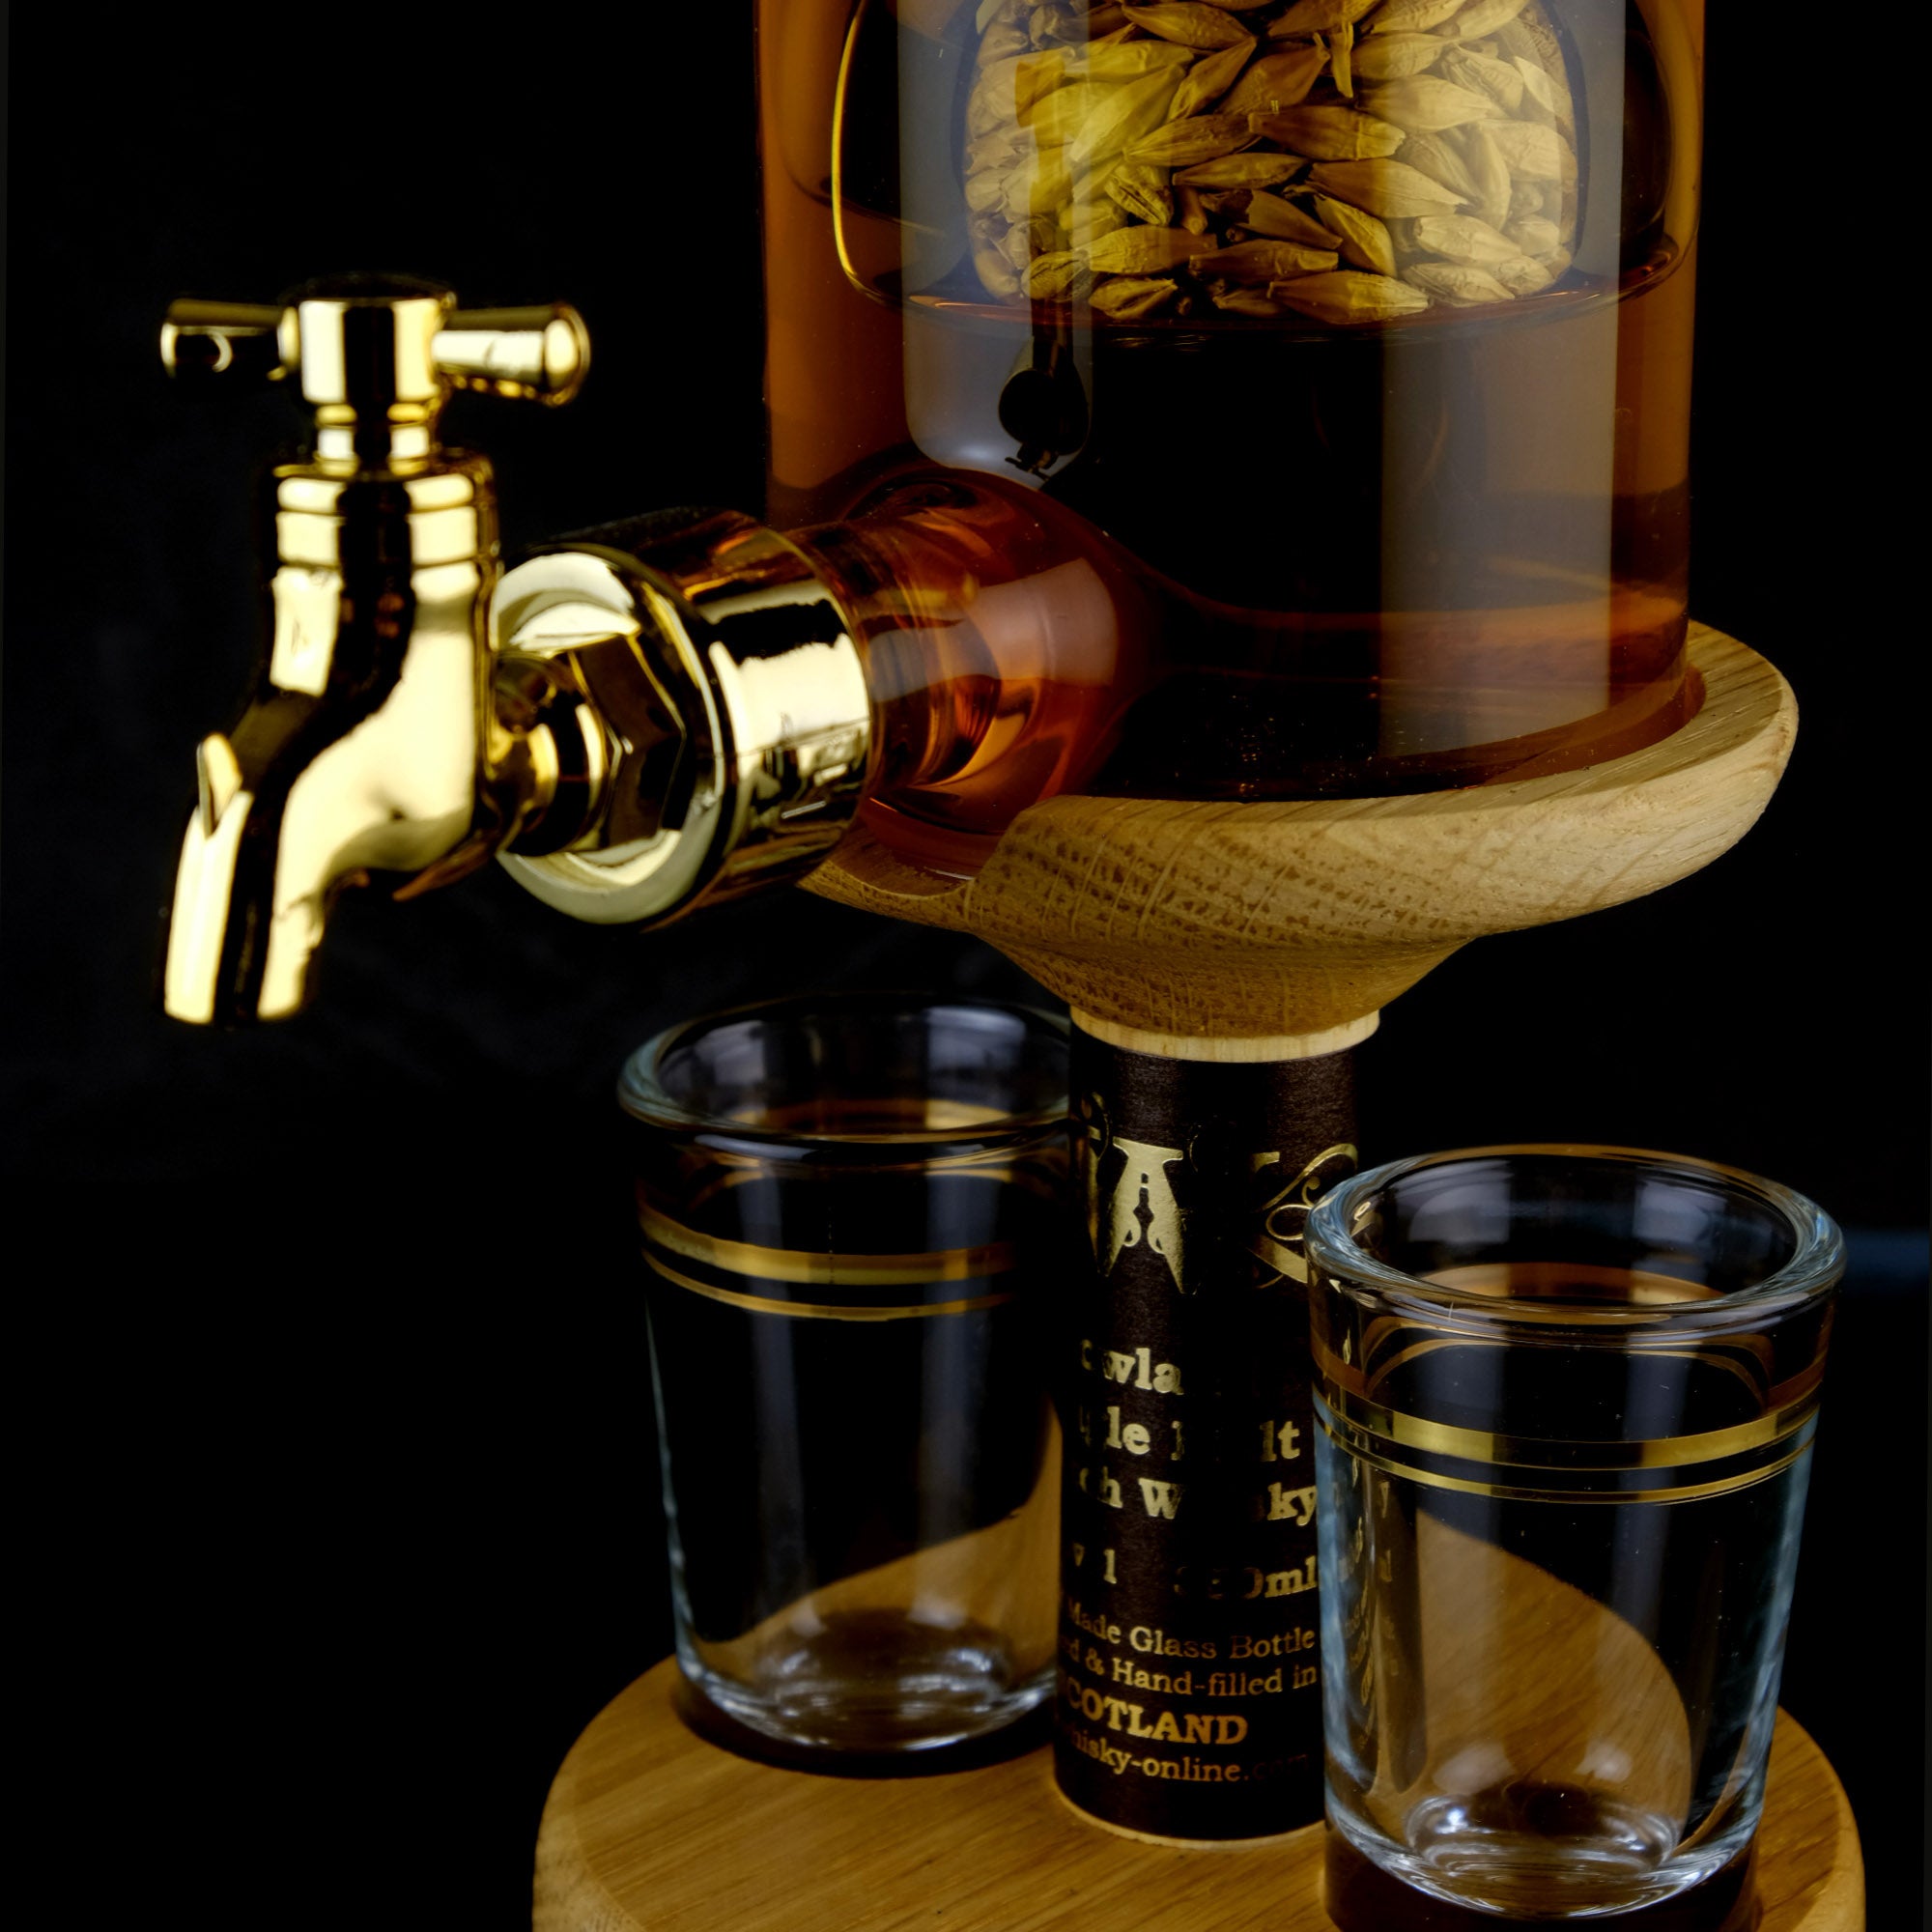 Barley Tap Whisky Decanter With Glasses